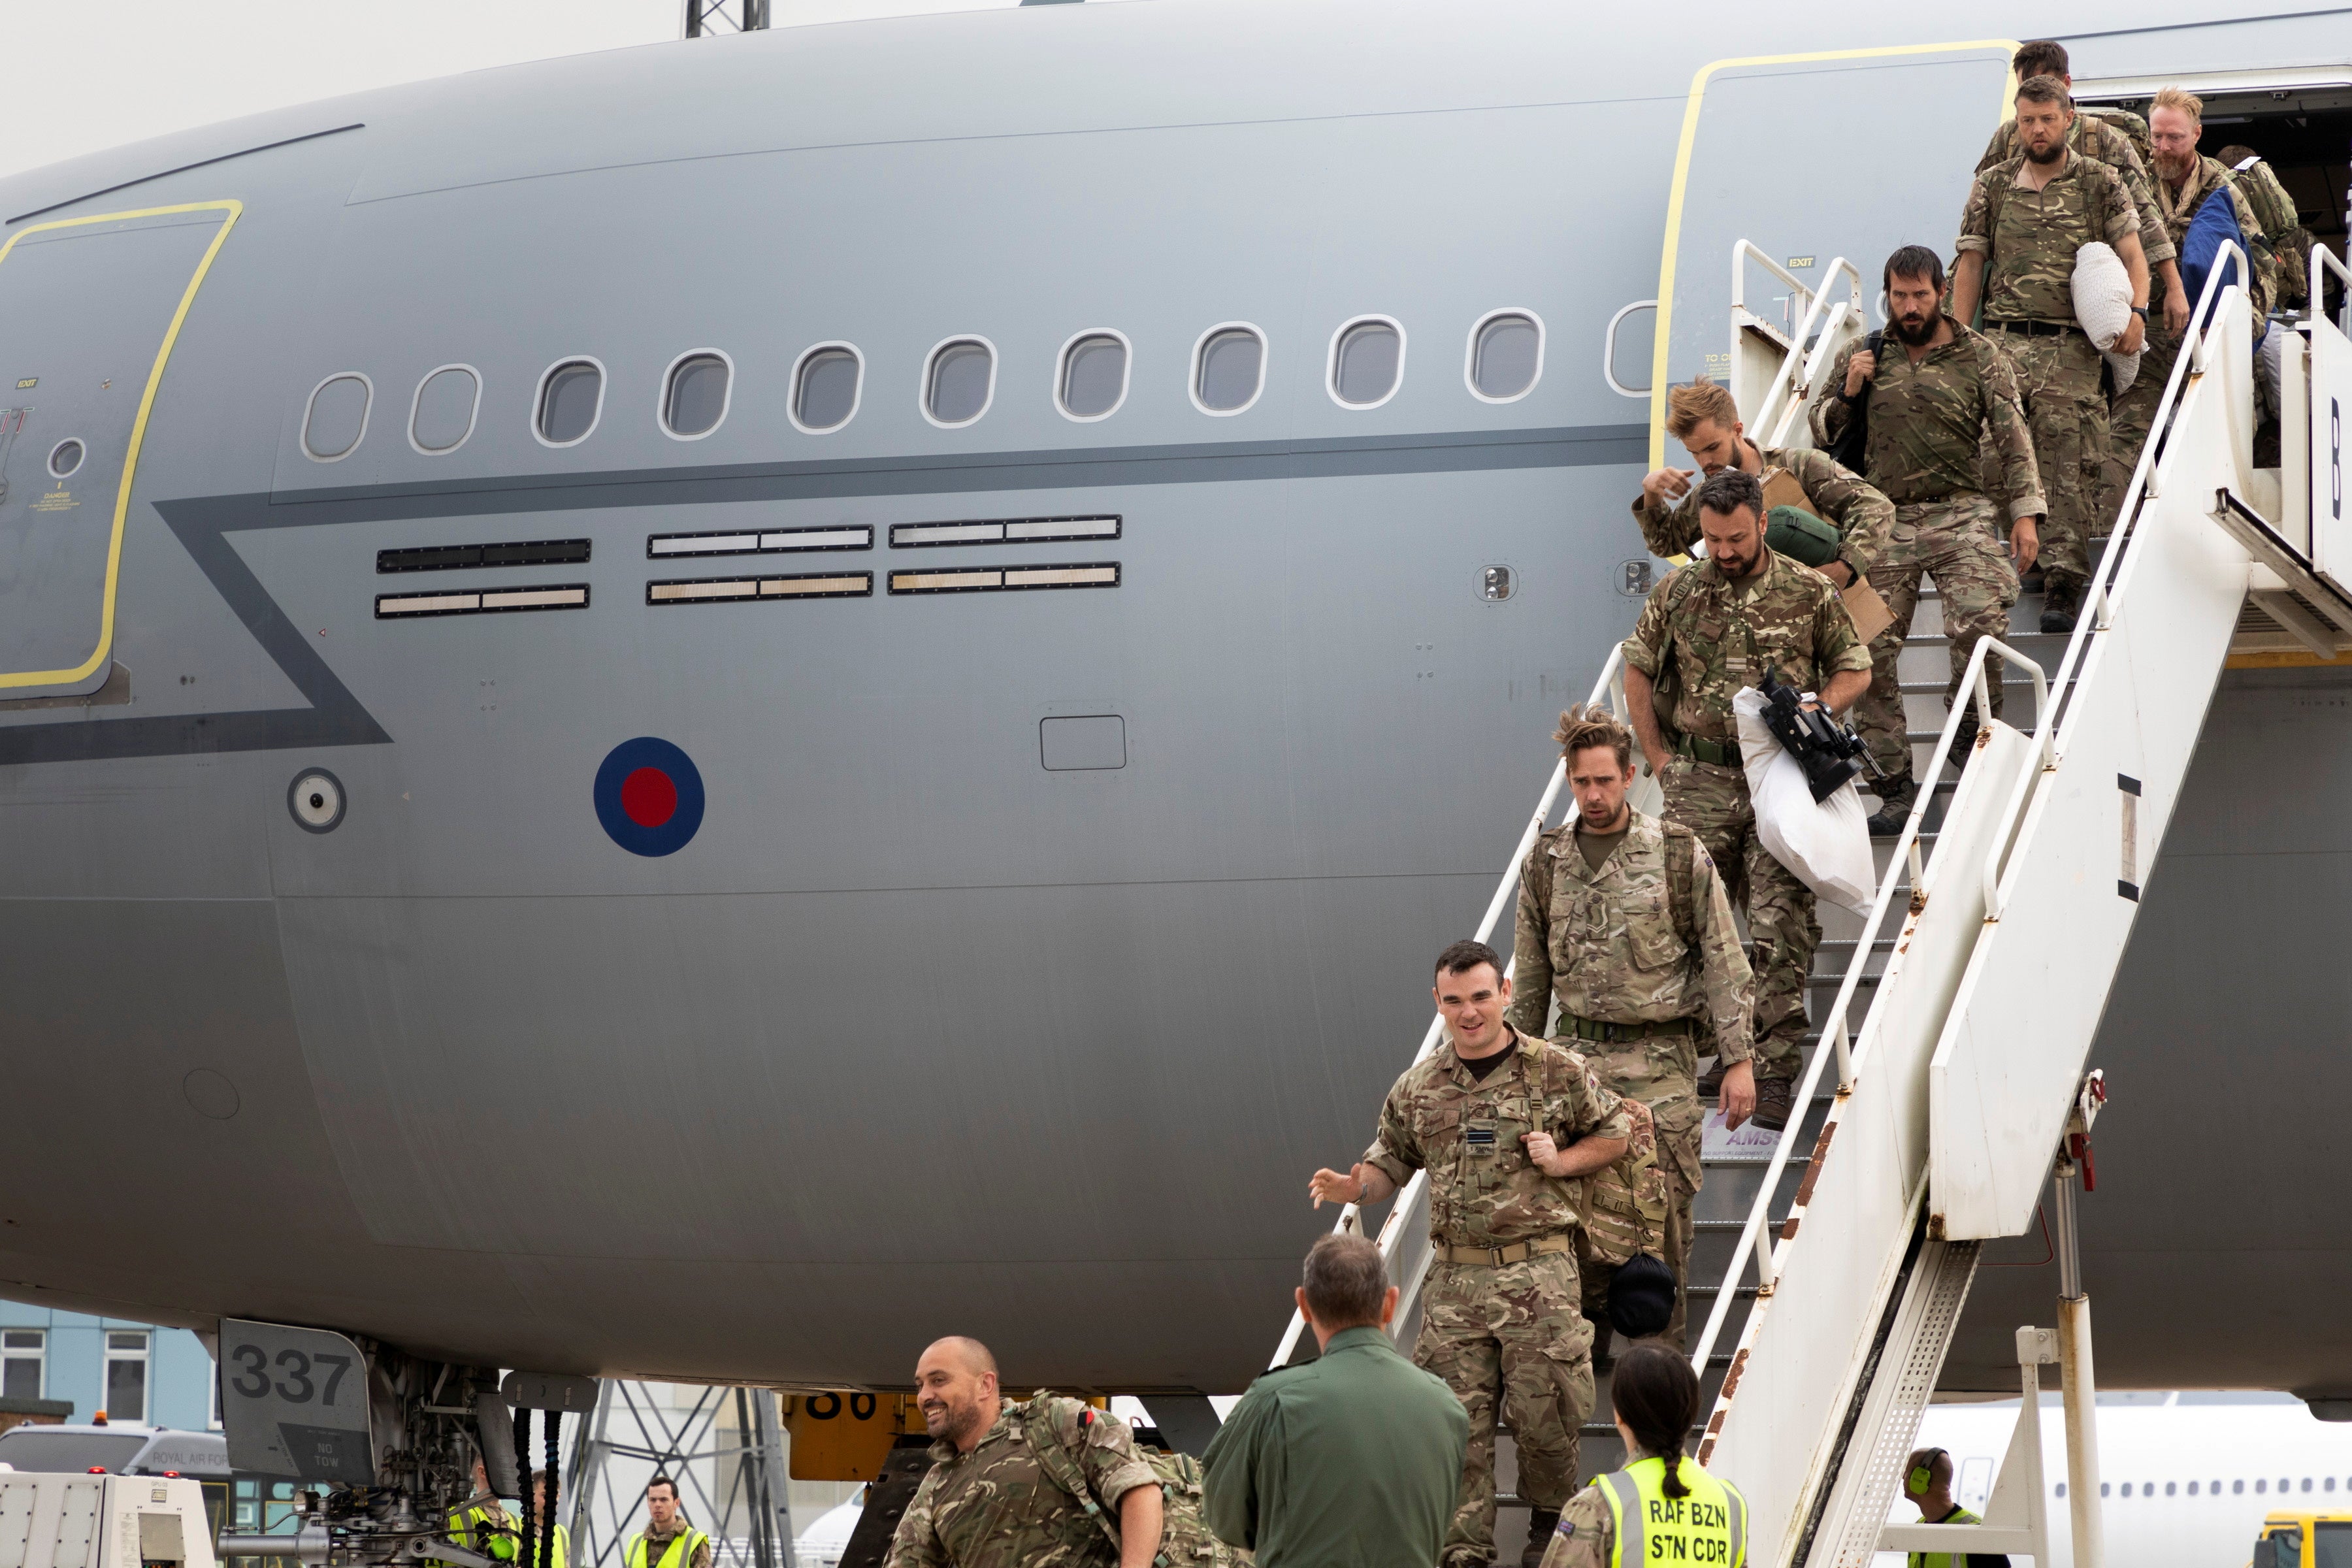 Military personnel arrive at RAF Brize Norton, in Oxford, base after being evacuated from Afghanistan